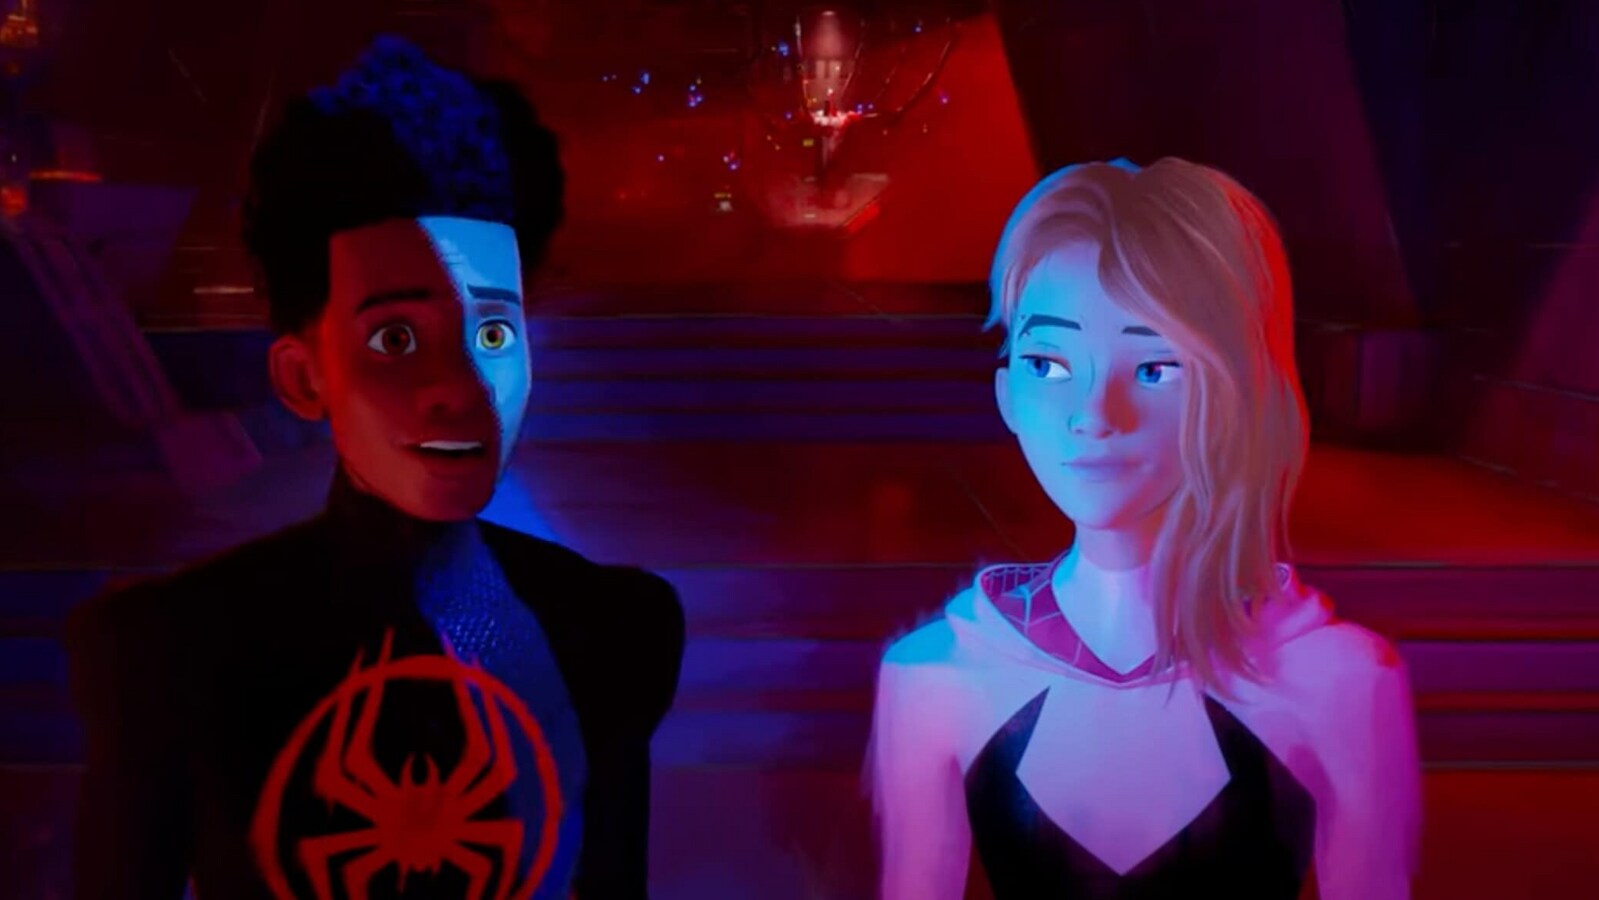 Spider-Man Across the Spider-Verse is not a ‘kid’s movie’, says senior animator | Hollywood